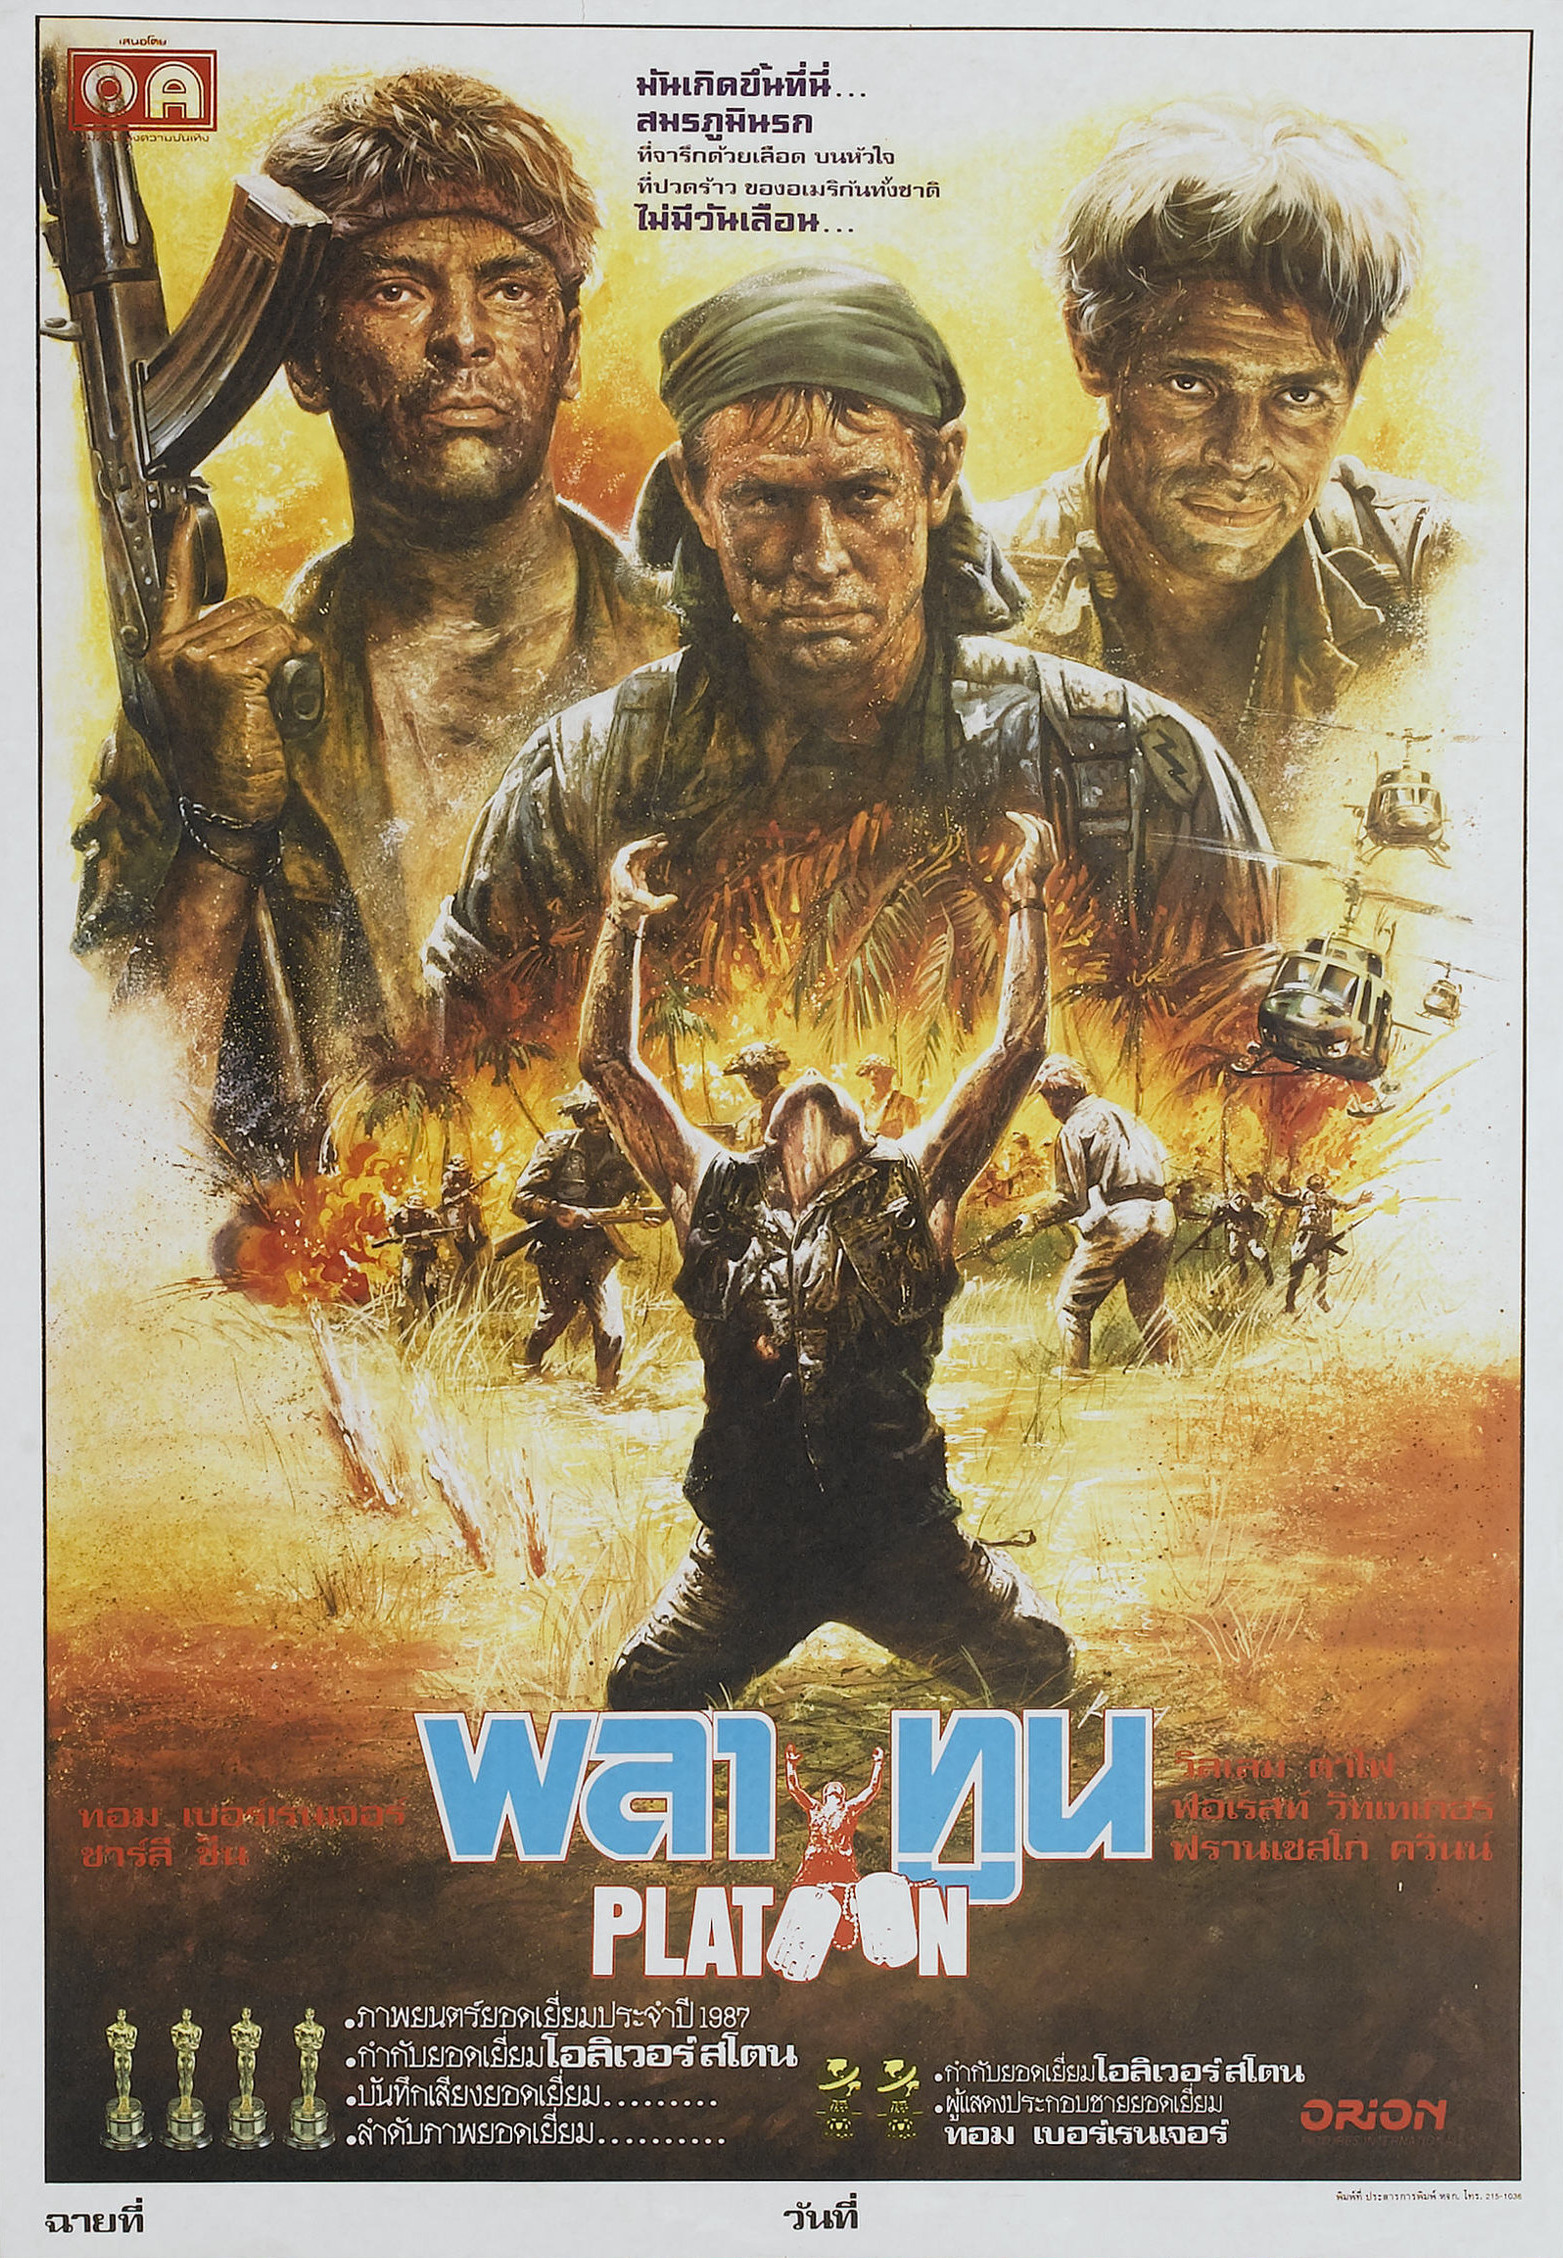 Mega Sized Movie Poster Image for Platoon (#9 of 12)